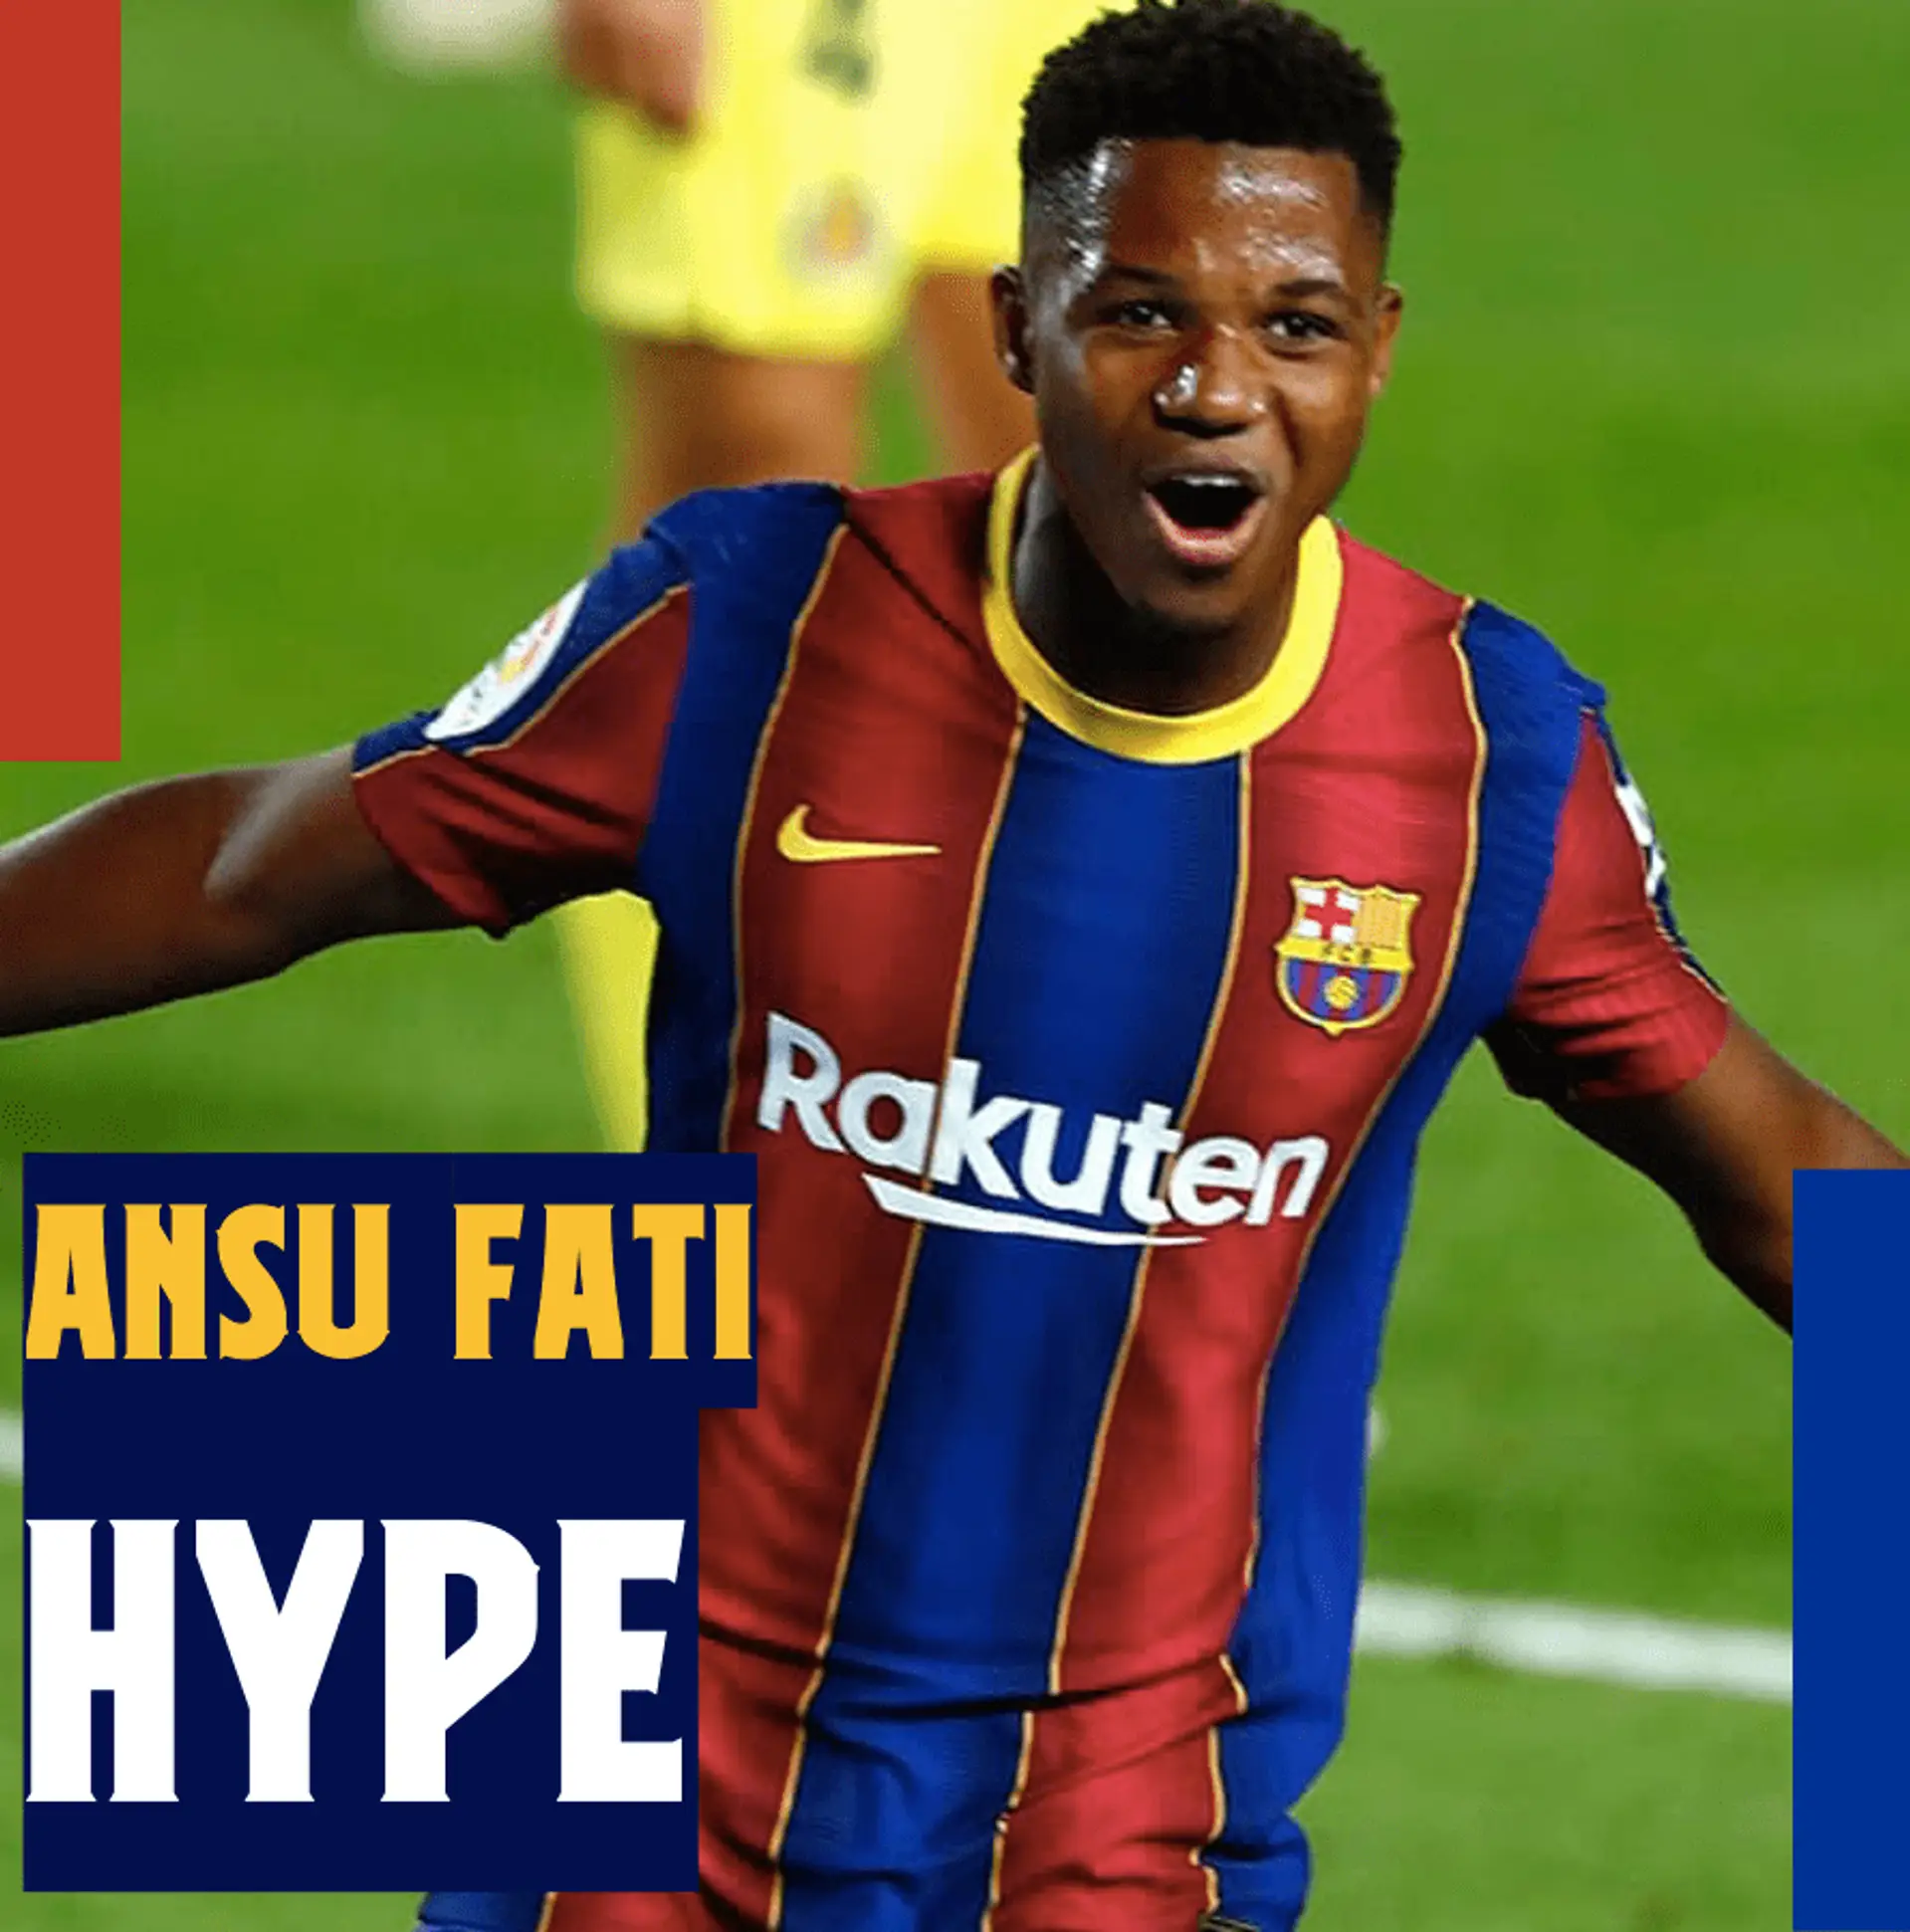 Ansu Fati HYPE: Too soon? Messi’s best position, finding Griezmann and Sergino Dest